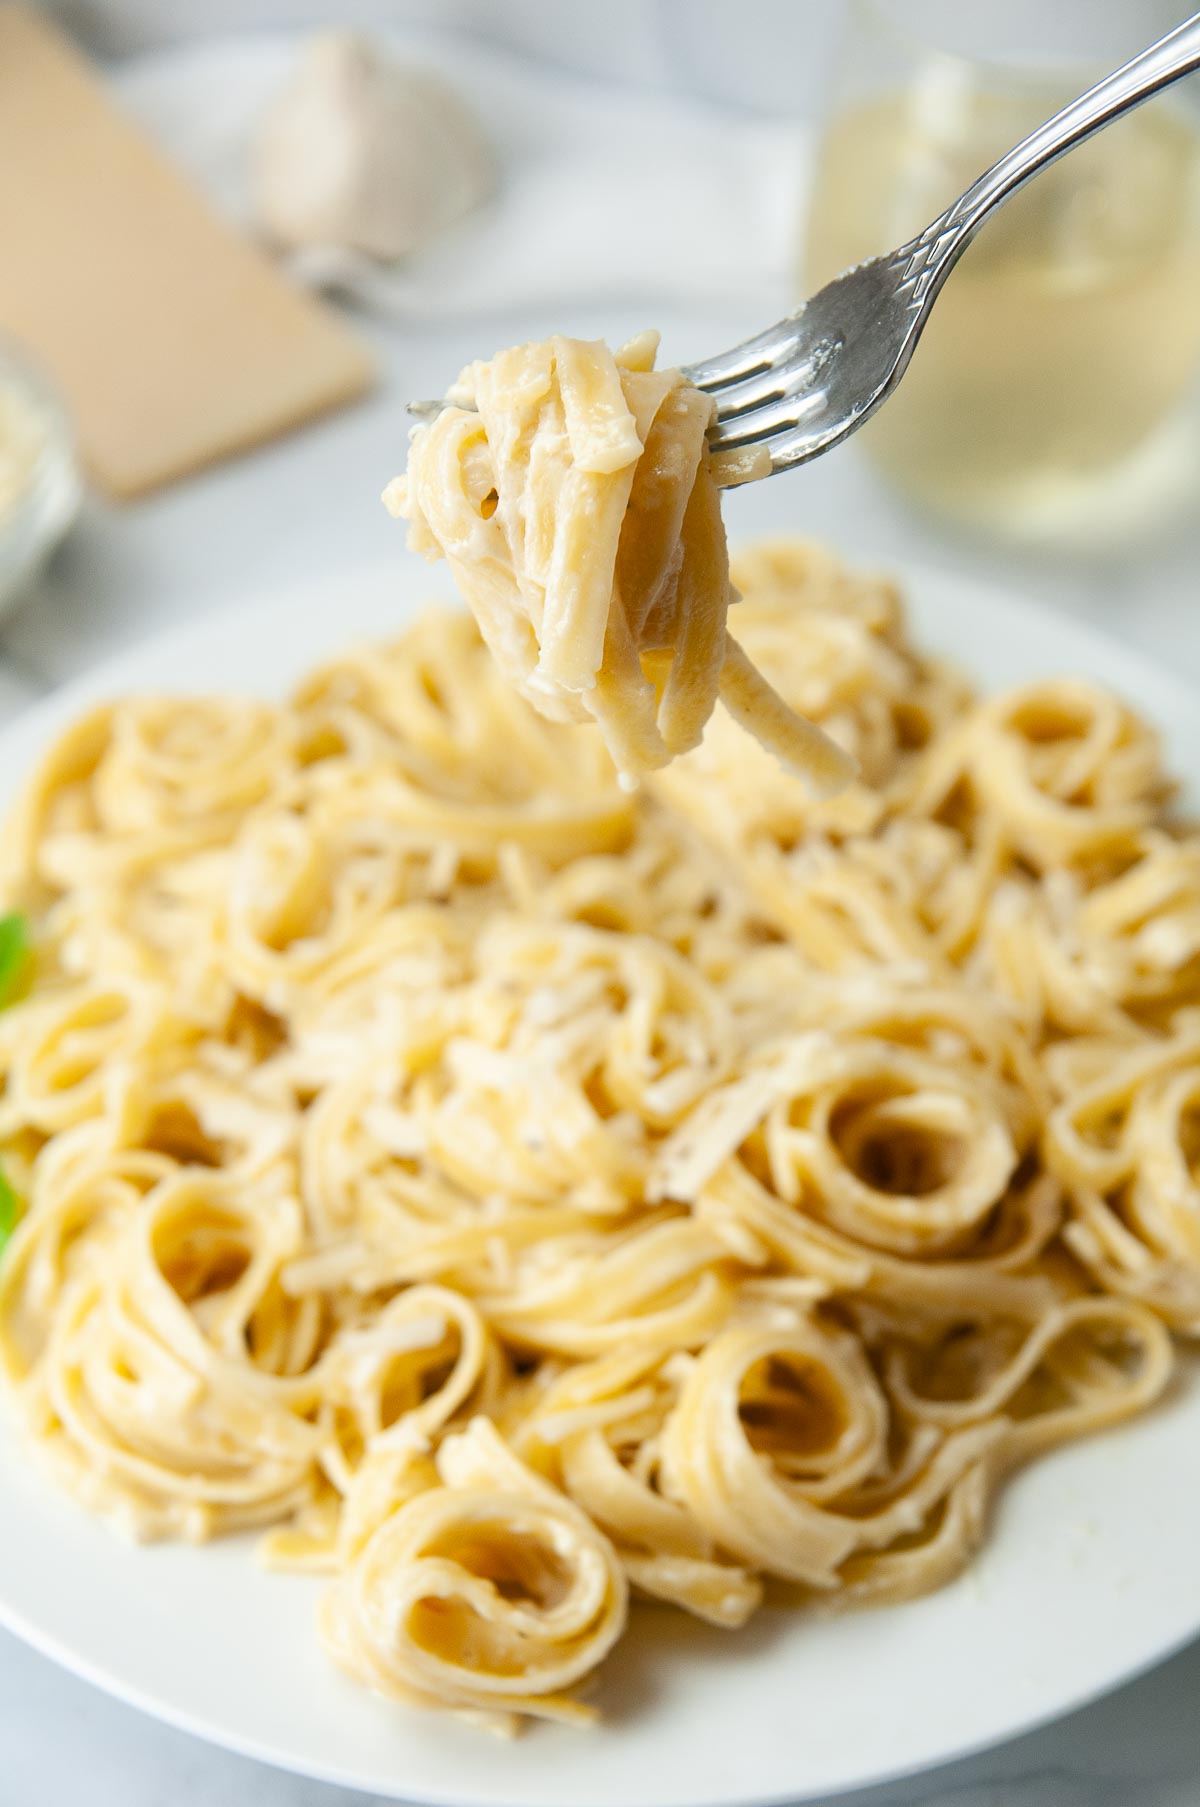 Instant Pot Fettuccine Alfredo is a lovely, easy dinner that gives you restaurant style pasta right at home.